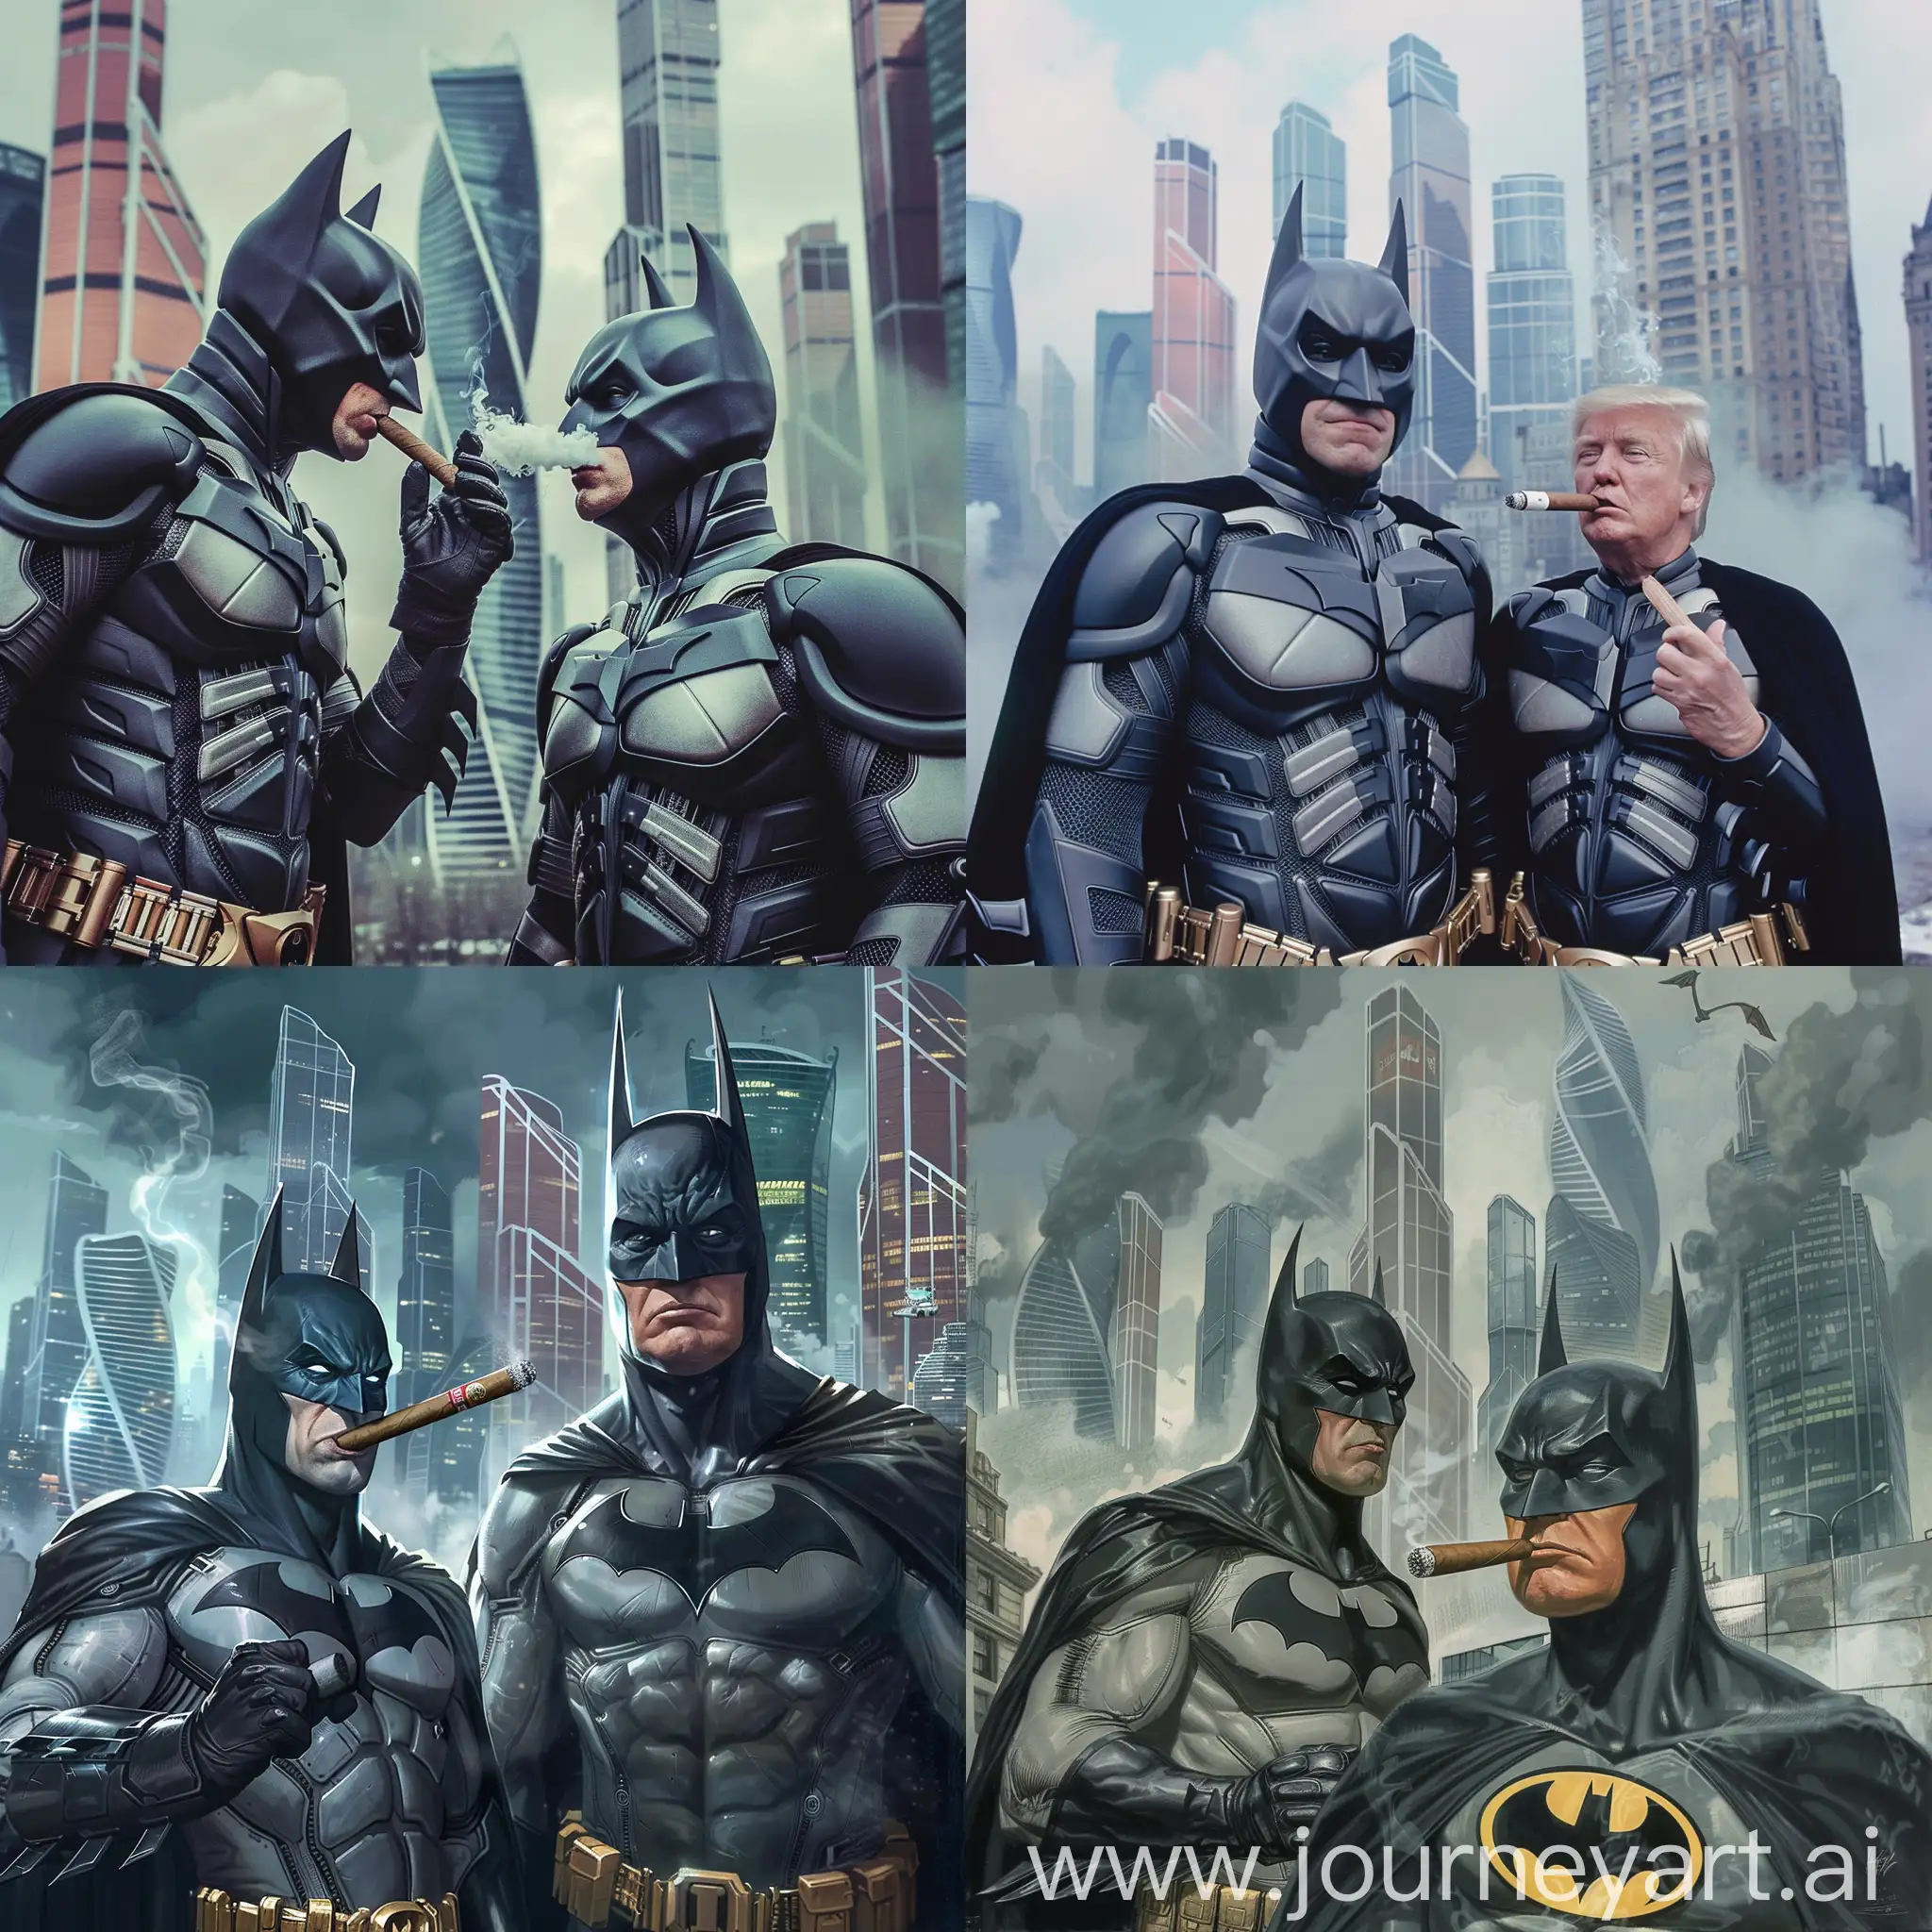 Batman smoke the cigar  with Donald trump, behind Moscow city skyscrapers 